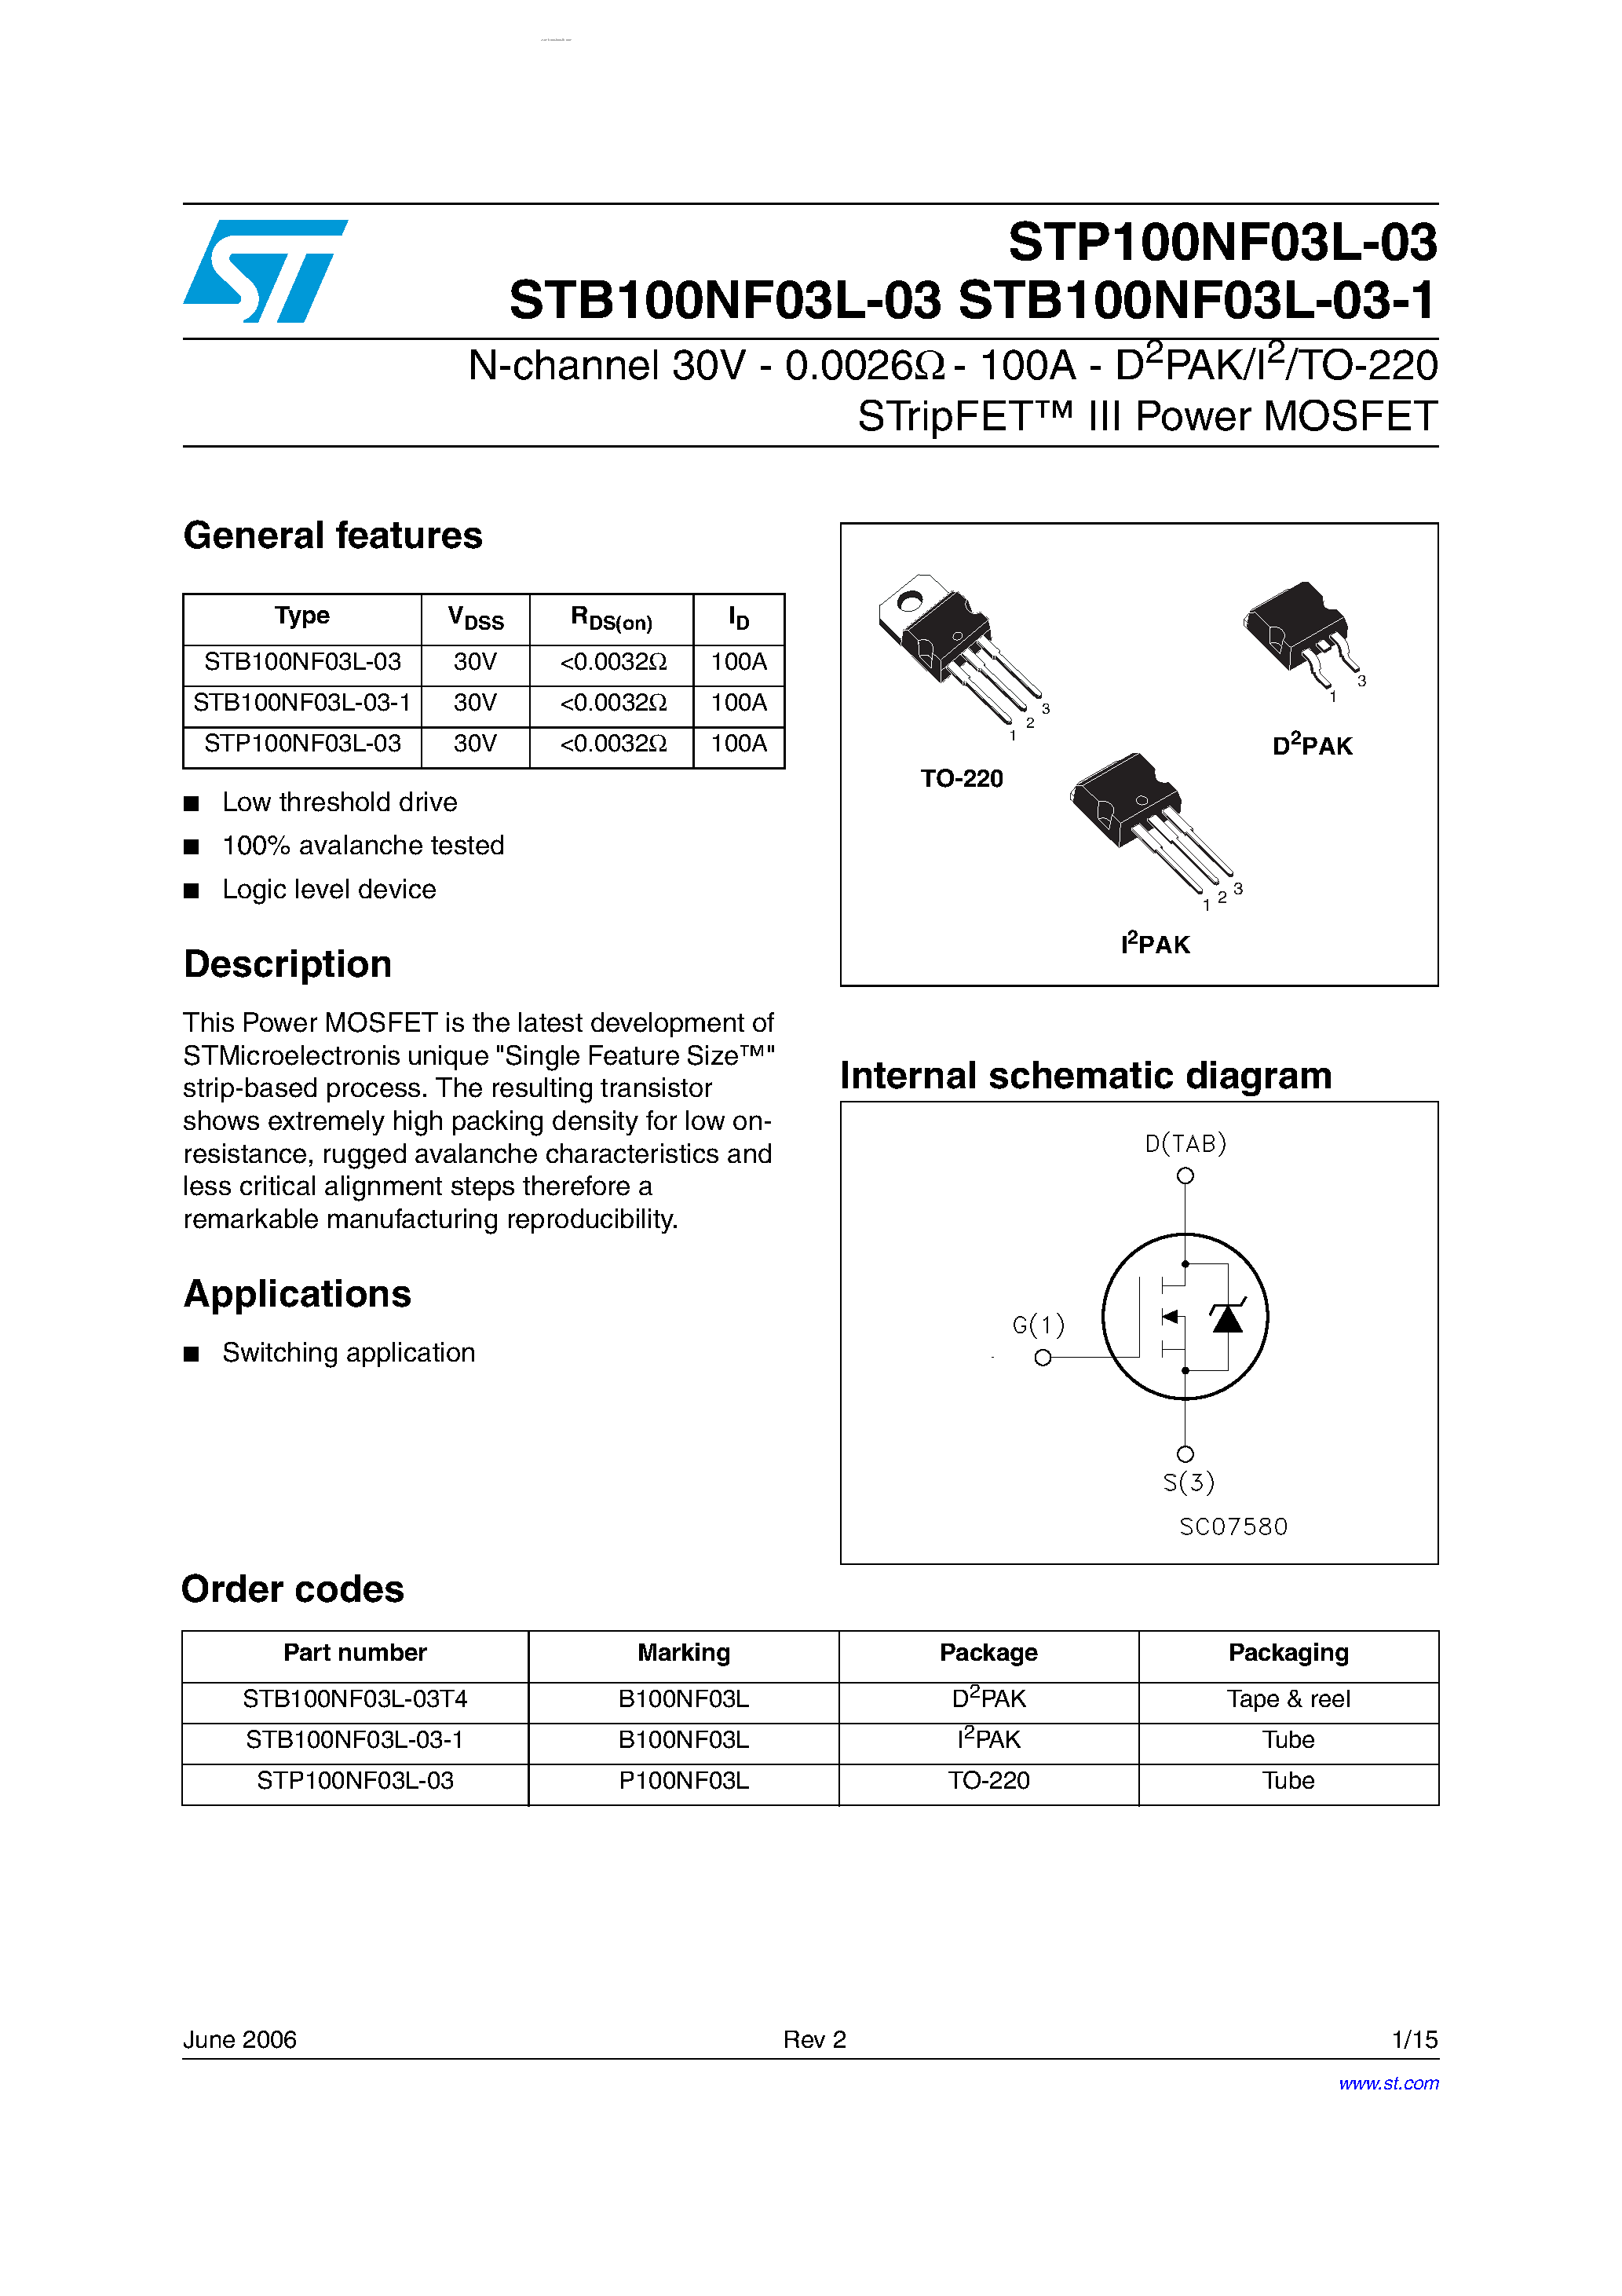 Datasheet STP100NF03L-03 - N-channel Power MOSFET page 1